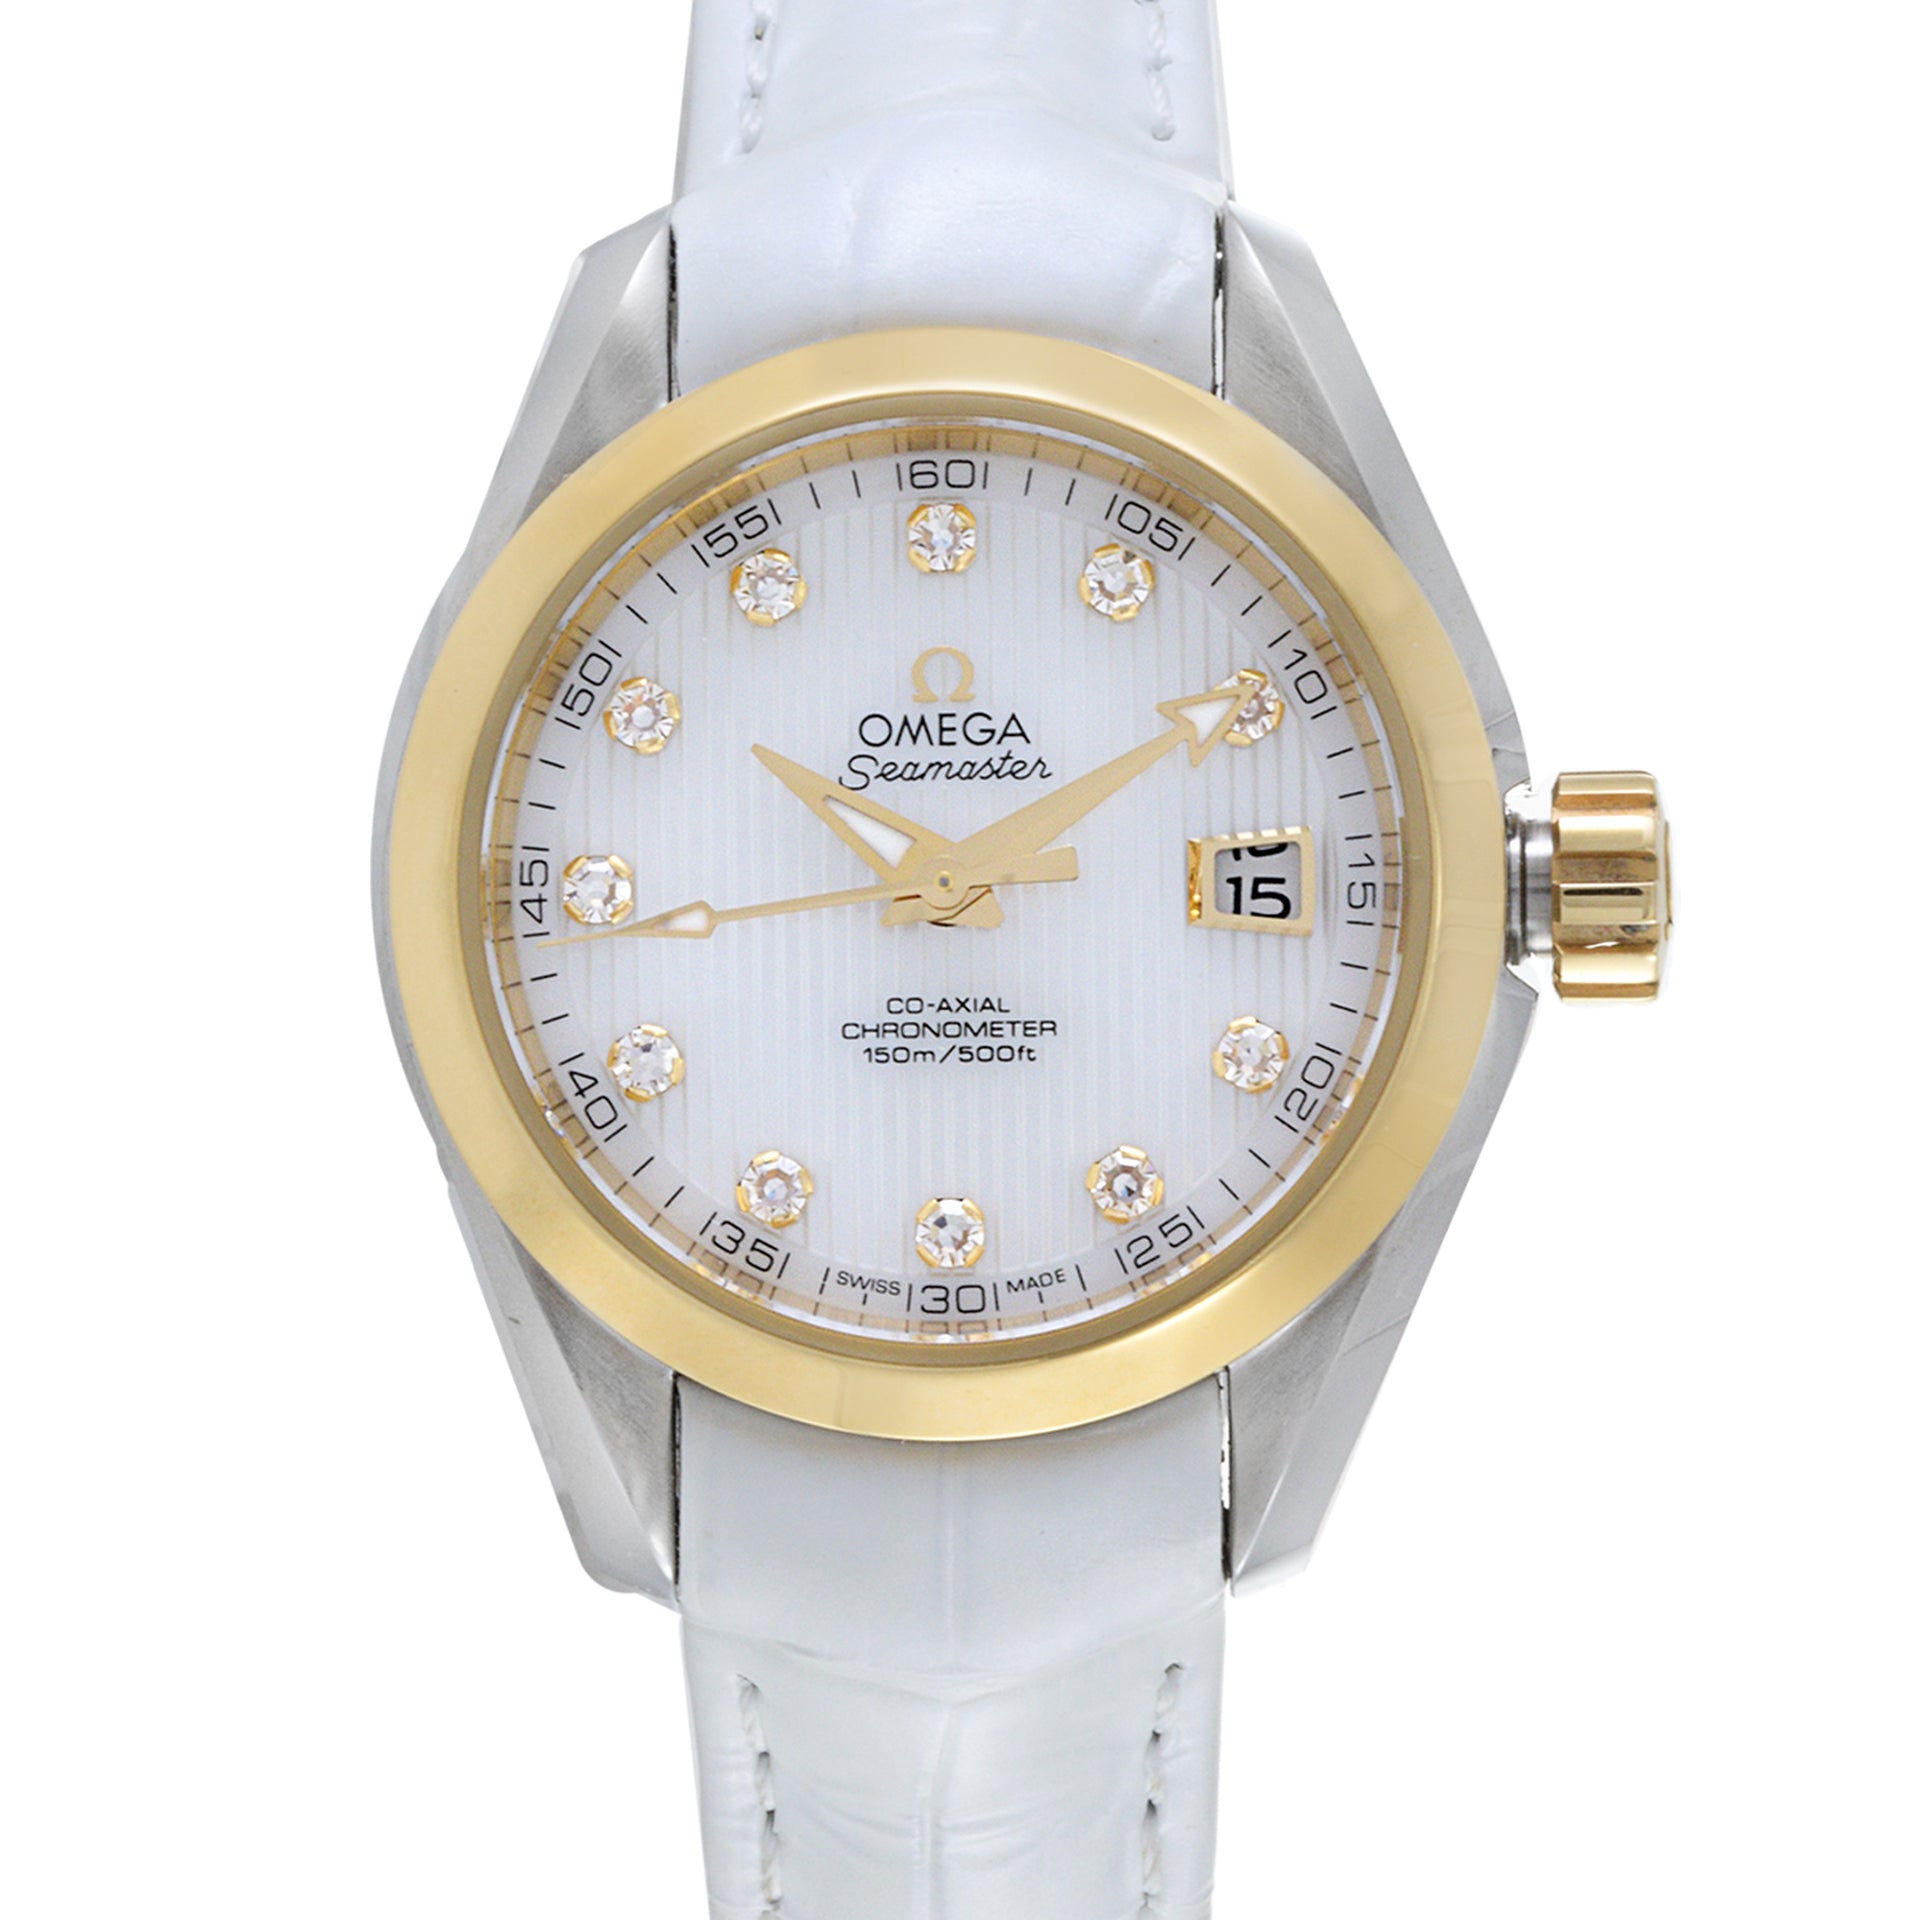 Omega Seamaster Aqua Terra Reference 231.23.30.20.55.002 Stainless Steel and 18K Gold